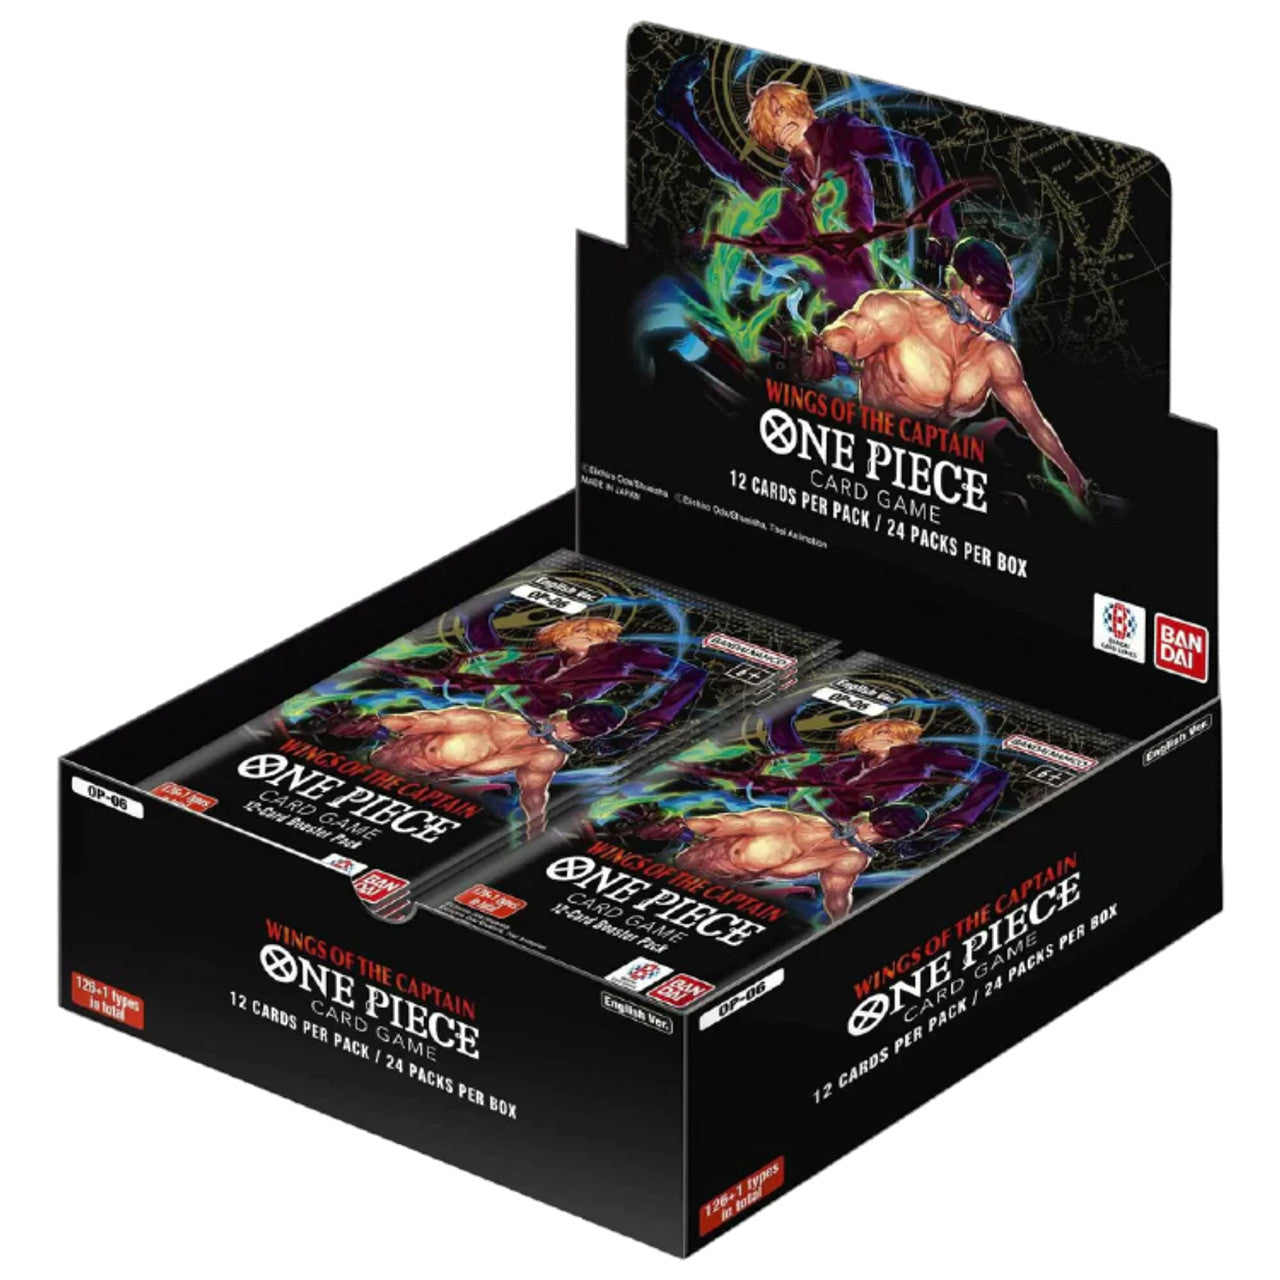 One Piece CG Wings of the Captain Booster Box [OP-06] | Silver Goblin